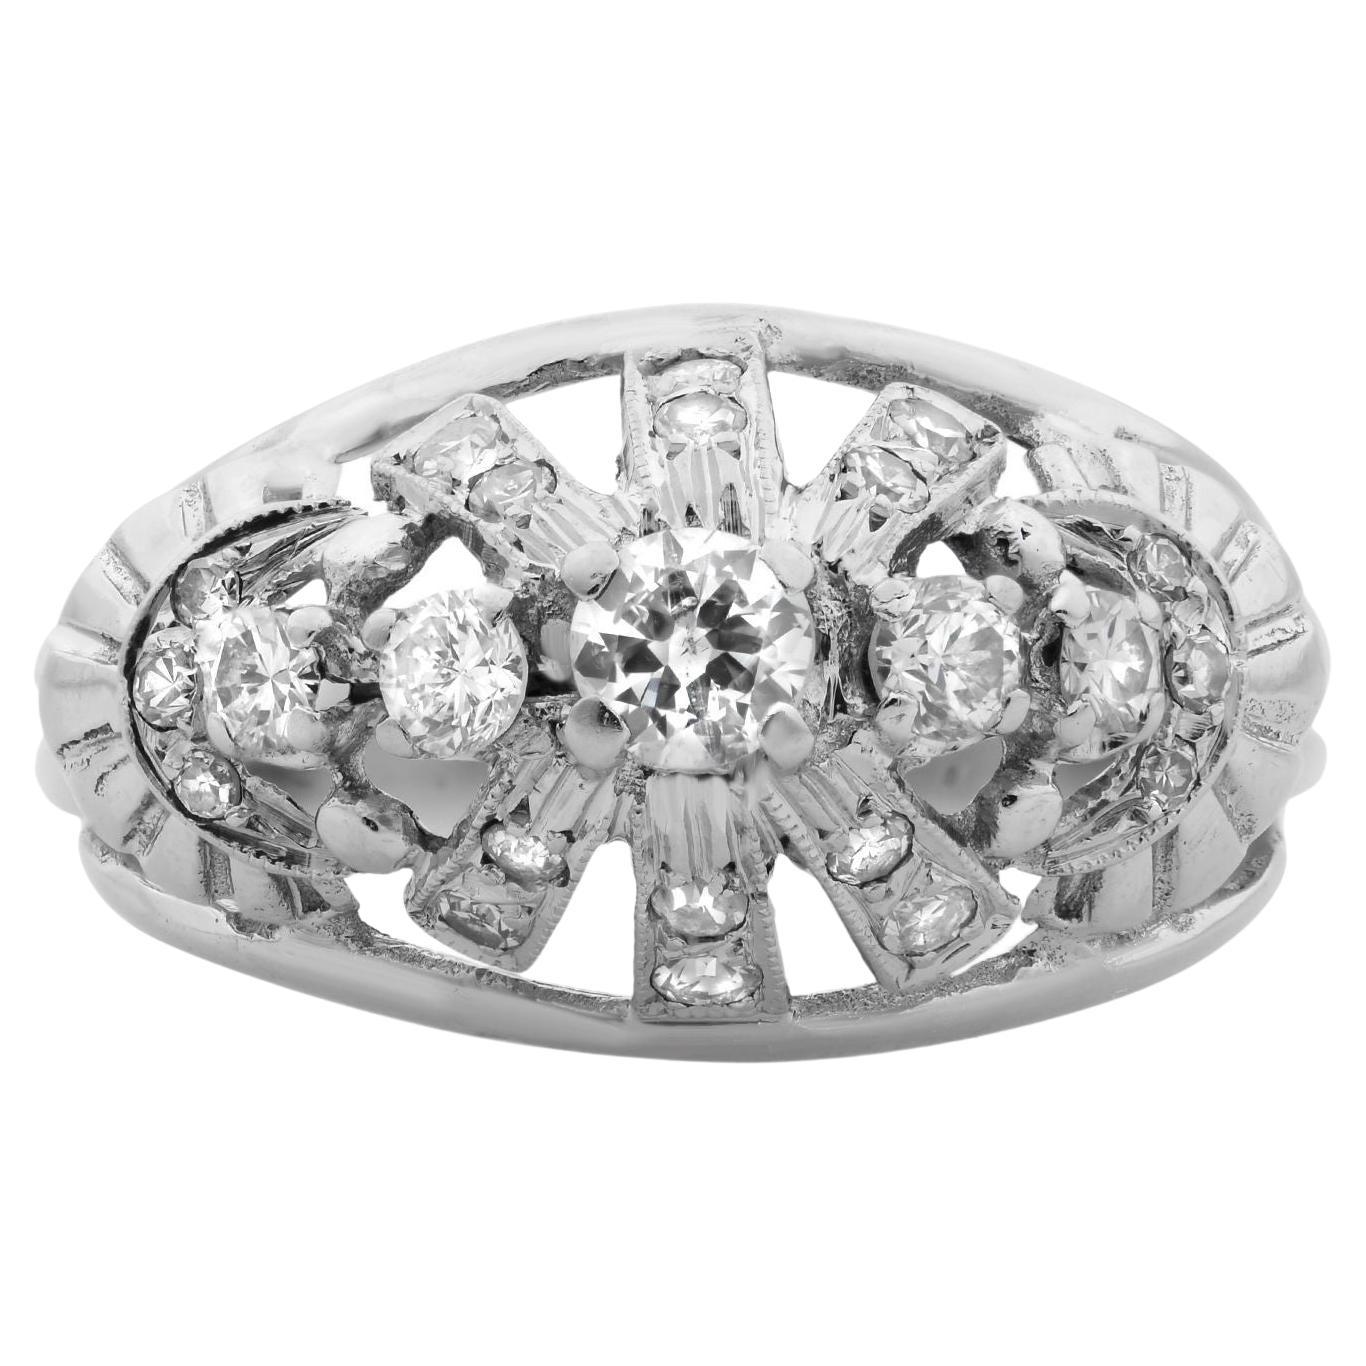 Vintage Dome Diamond Cocktail Ring 14K White Gold 0.36Cttw For Sale